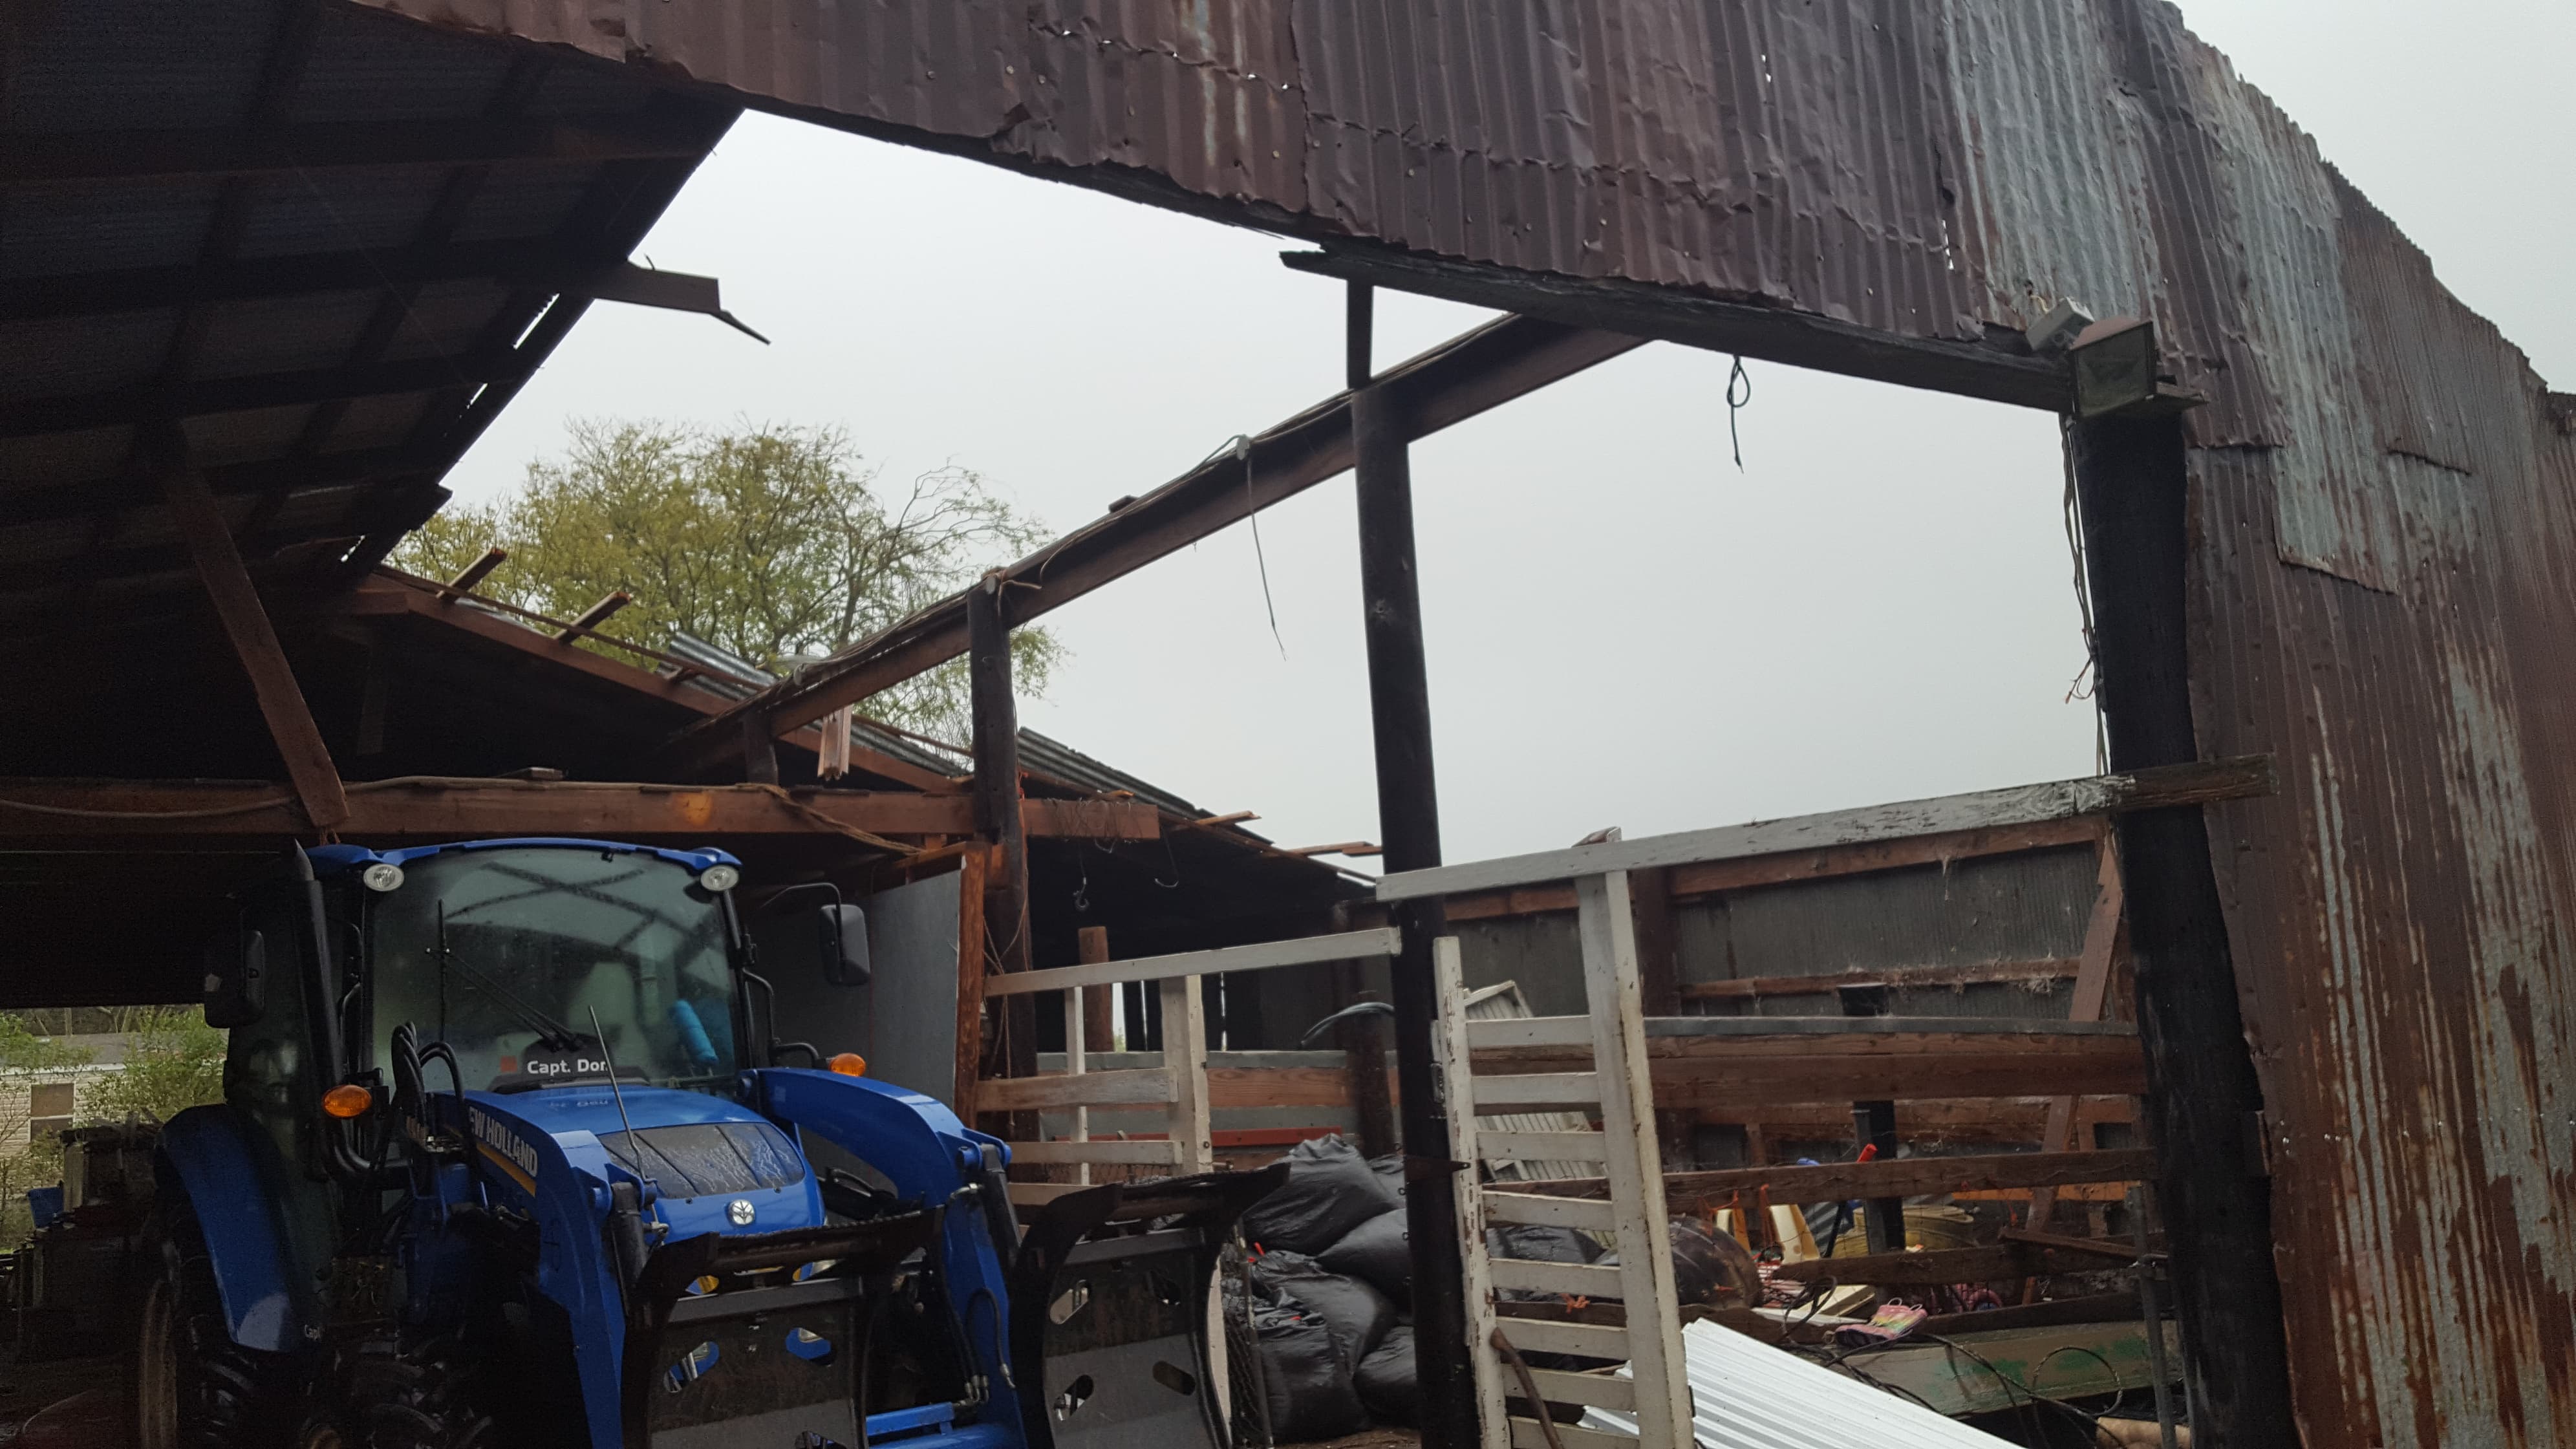 Tractor in shed with debris